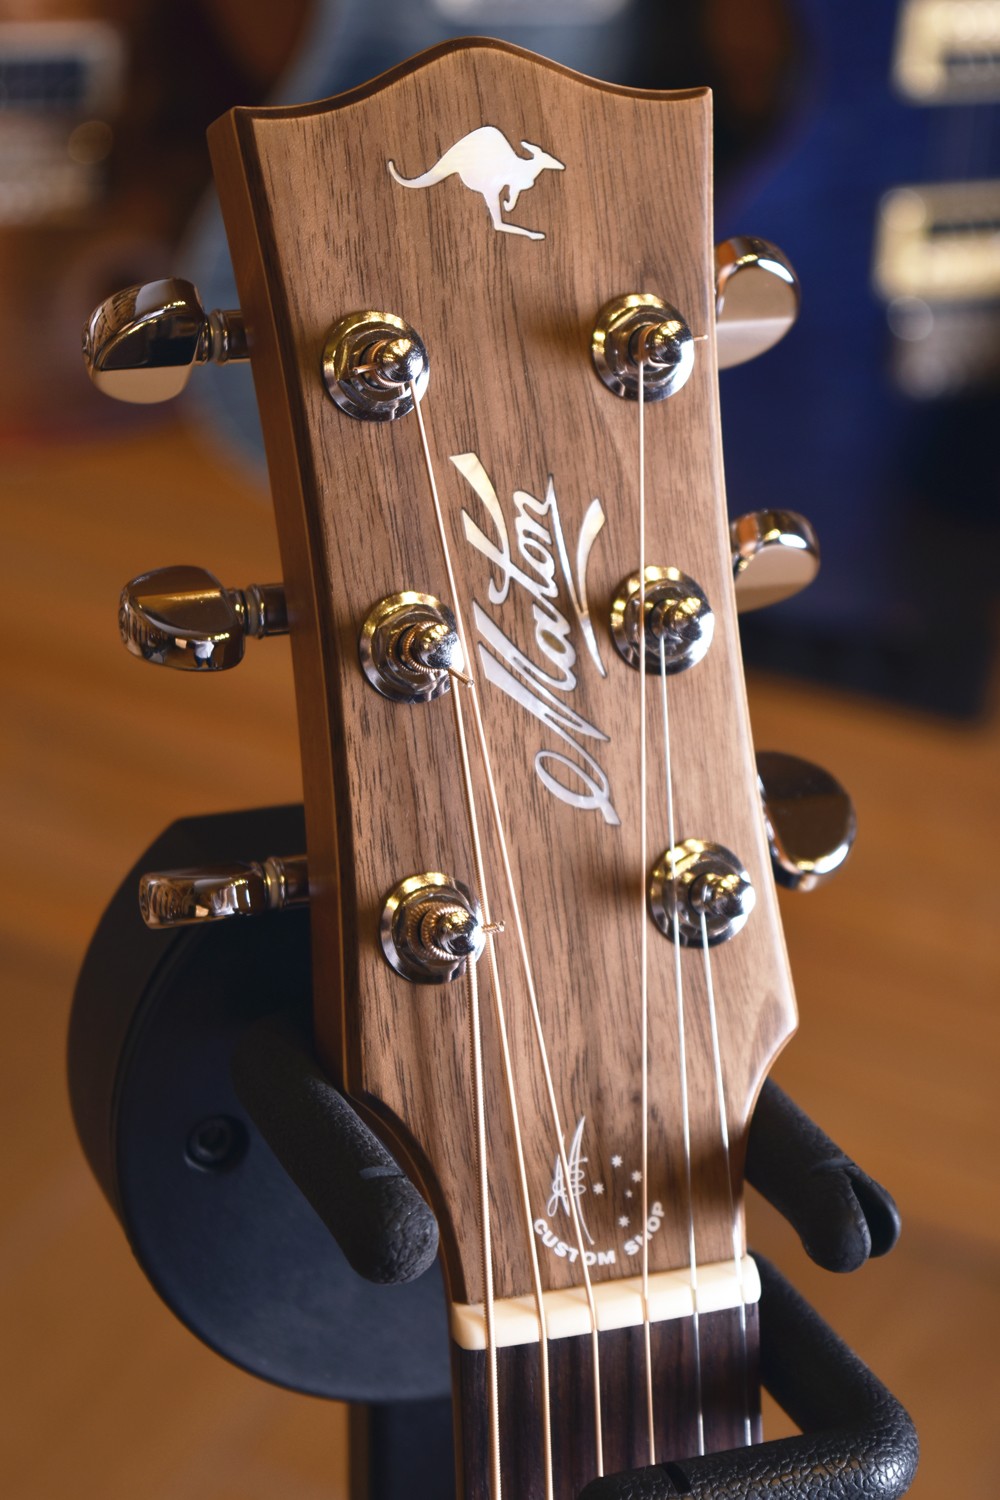 maton mastersound serial numbers